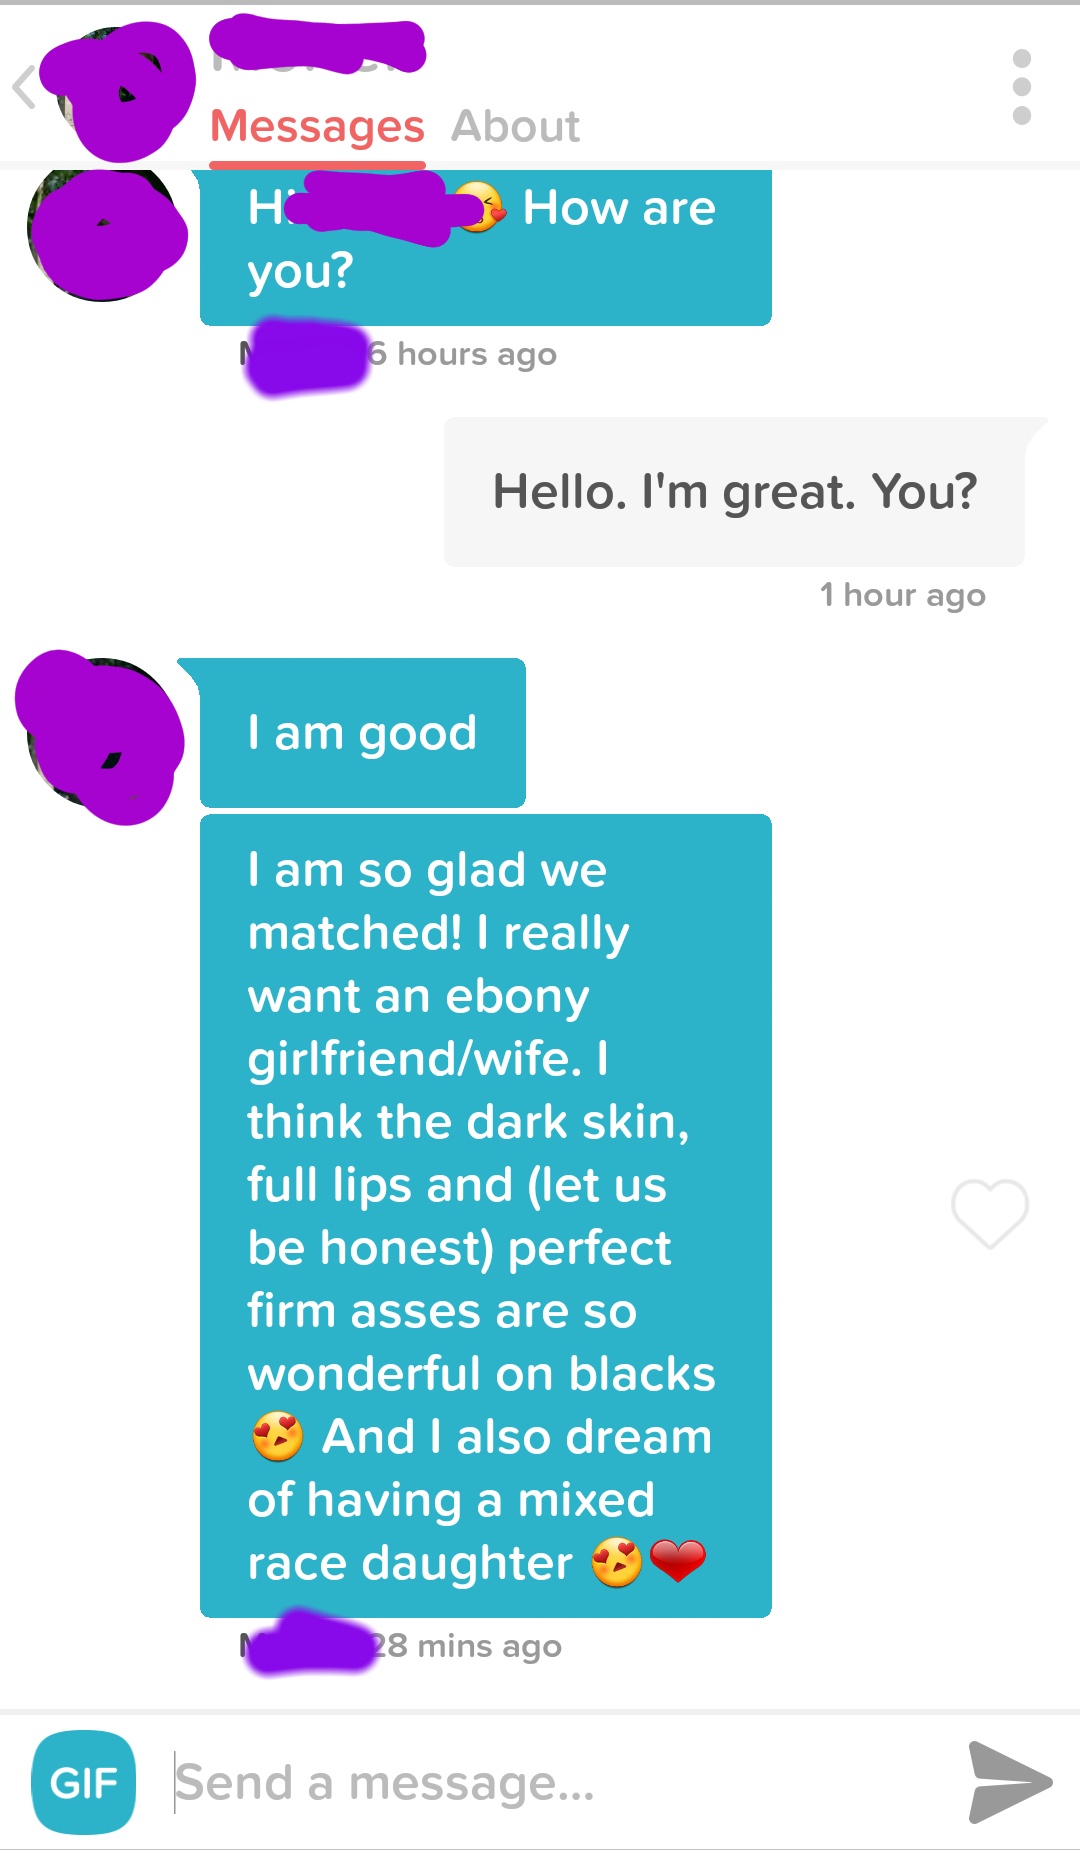 Cringe post of someone who was matched with a black woman and goes on an ebony rant.